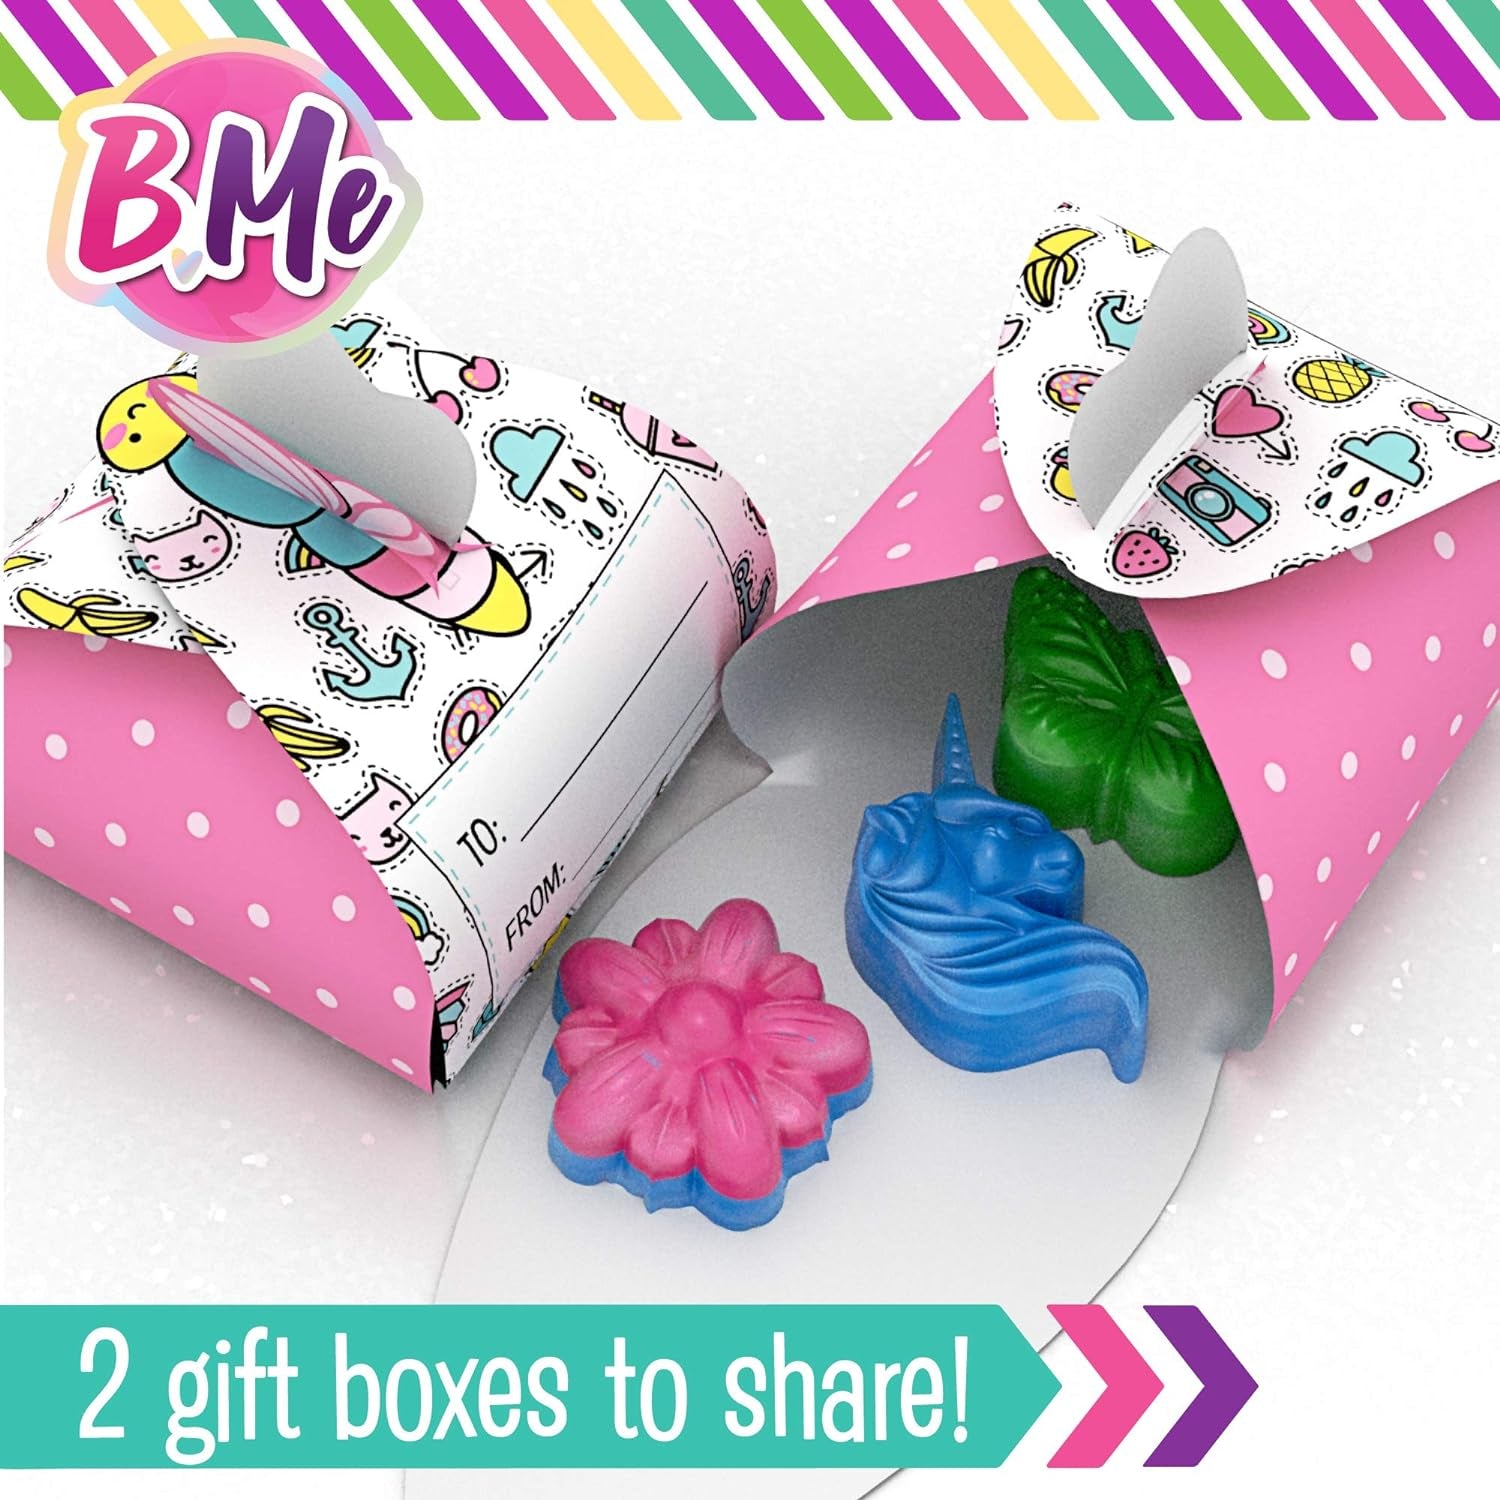 Beginner Soap Making Craft Kits for Kids Girls Ages 6+ | Make 15+ Soap Shapes with 5 Different Scents | Make Your Own Soap Science Kits Toys Gifts